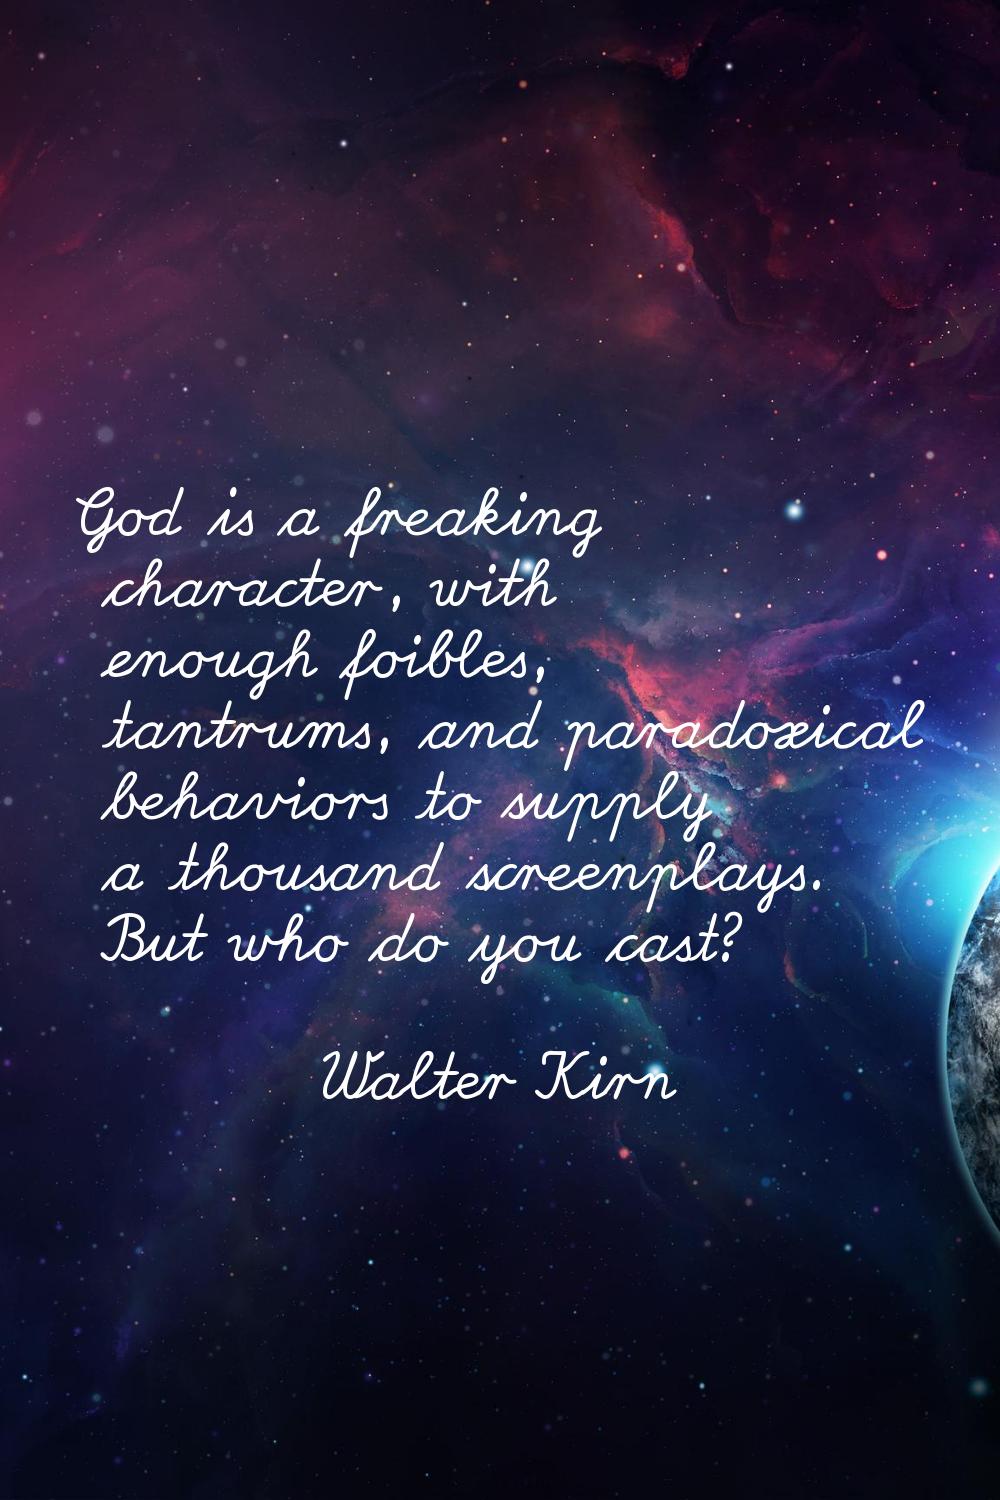 God is a freaking character, with enough foibles, tantrums, and paradoxical behaviors to supply a t